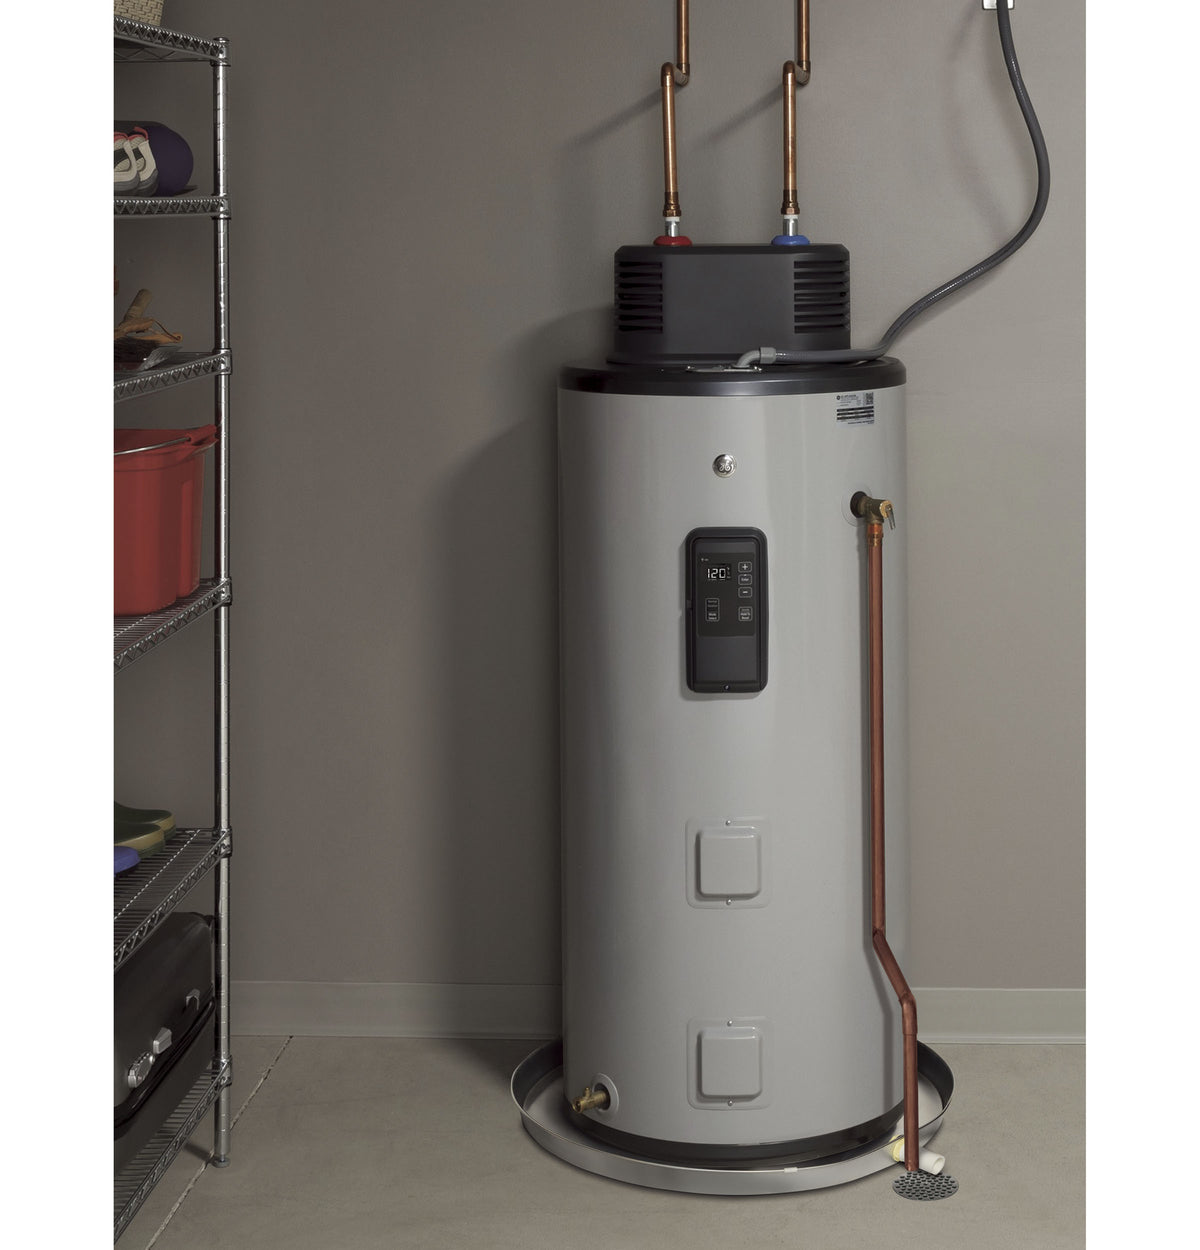 https://www.geaprstore.shop/wp-content/uploads/1690/18/ge-smart-50-gallon-electric-water-heater-with-flexible-capacity-ge-appliances-pr-online-store-explore-the-latest-trends-in-fashion-and-start-shopping_1.jpg